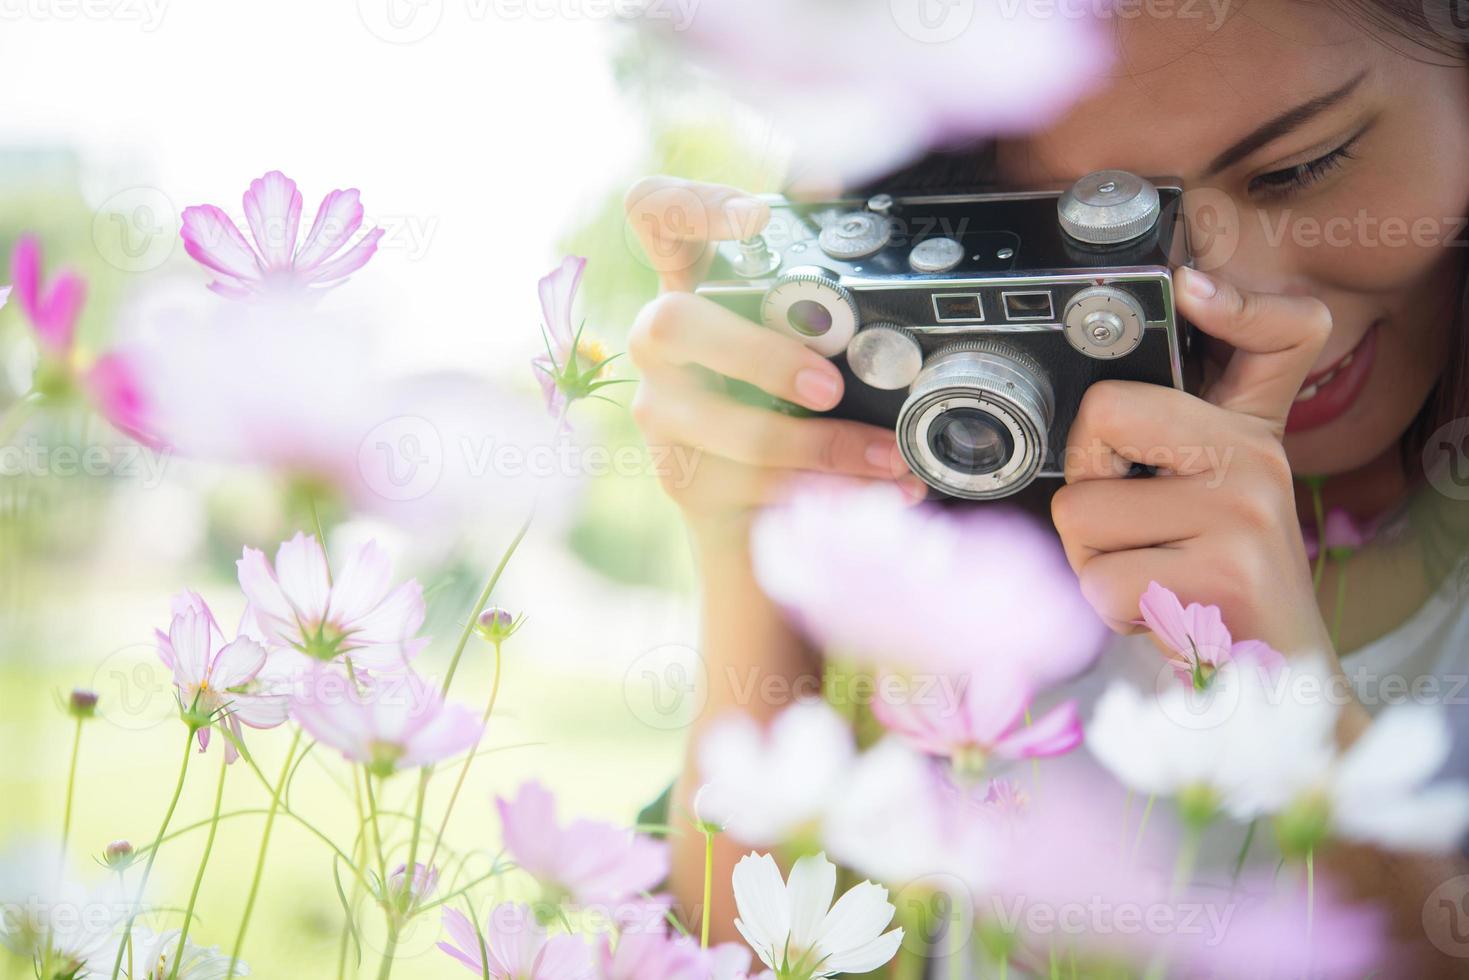 Hipster girl with vintage camera focus shooting flowers in a garden photo